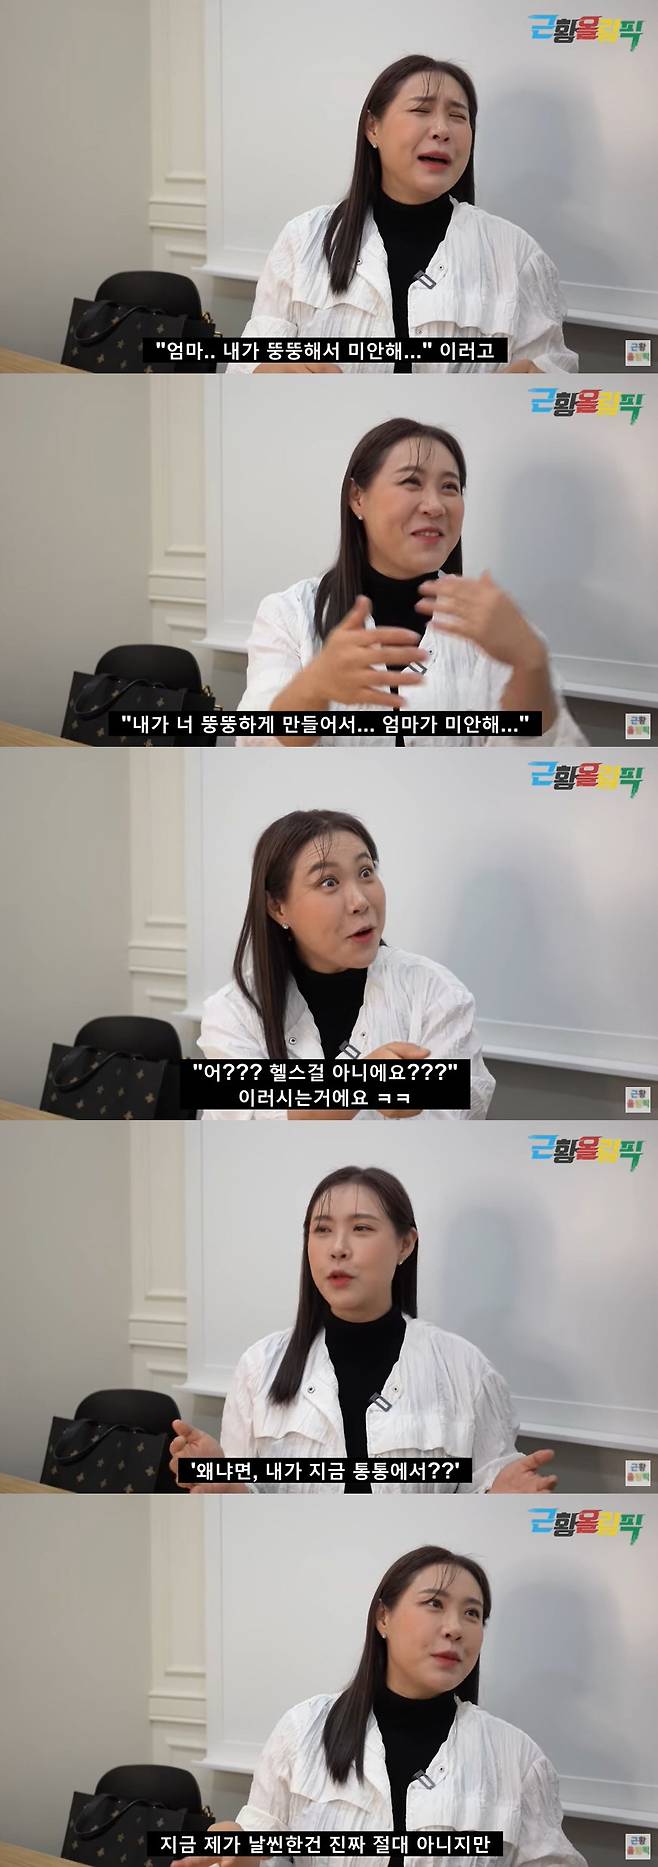 Health Girl Lee Hee-kyung looked back on the diet history that was not as good as an athlete.On the 11th, YouTube channel Recent Olympics, the recent news of gag woman Lee Hee-kyung was revealed.Lee Hee-kyung said, I went to United States of America for a year to study in the language, and after I went to United States of America, I was in charge of economic broadcasting.Lee Hee-kyung, along with Kwon Mi-jin, lost more than 30kg to the Gag Concert and Health Girl corner. Lee Hee-kyung said, I started at 87kg and lost 55kg.After that, I lost 49kg, he said. Then I met the groom. The groom pointed to the wedding photo and said, Where is she?At the time of Health Girl, the diet schedule was no less than a decent athlete. Lee Hee-kyung said, I cant even beat it (on the air).When I wake up in the morning, I work at Gacon for an hour of muscle exercise like a camp, and then I go to work at KBS 1st floor gym for another two hours.This is the weekday schedule, he said. On the weekend, Lee Seung-yoon opened a big gym on Cheonan side.I go to KTX and go there and go back to Seoul for one night. Lee Hee-kyung, who said that there was a aftermath of a sudden diet, said, I had a hair loss. One day I came home and I smelled a little kimchi stew.My mum was trying to eat before I came from there when she was in a snowy encounter, she revealed.Lee Hee-kyung, who was sensitive to diet, shed tears with her mother. Lee Hee-kyung said, My mother cried because she was sorry.I was also sensitive to emotions and when I was in a hurry, I said, Mom, Im sorry Im fat, and my mother cried, Im sorry I made you fat.I still have a red eye when you two talk about it. I succeeded in dieting through the Health Girl corner, but I had another problem. Lee Hee-kyung said, The viewers have long been worried about what I want when I am slim.I was so plump that I could not broadcast actively.  Fortunately, I do not think that now.Lee Hee-kyung said, I am not slim now, but I am always happy. I think that others like me because I think so.He also operated a jjimjilbang, but it was hit by Corona 19, and now someone else is running it. Lee Hee-kyung said, It was good in the early days.Corona burst and returned all she had made before that for two years. It was too hard.I feel like Im always on one side, he said. There is also the burden of filling the negative by doing things I like or broadcast.I am grateful for it because the broadcast comes in like this. 